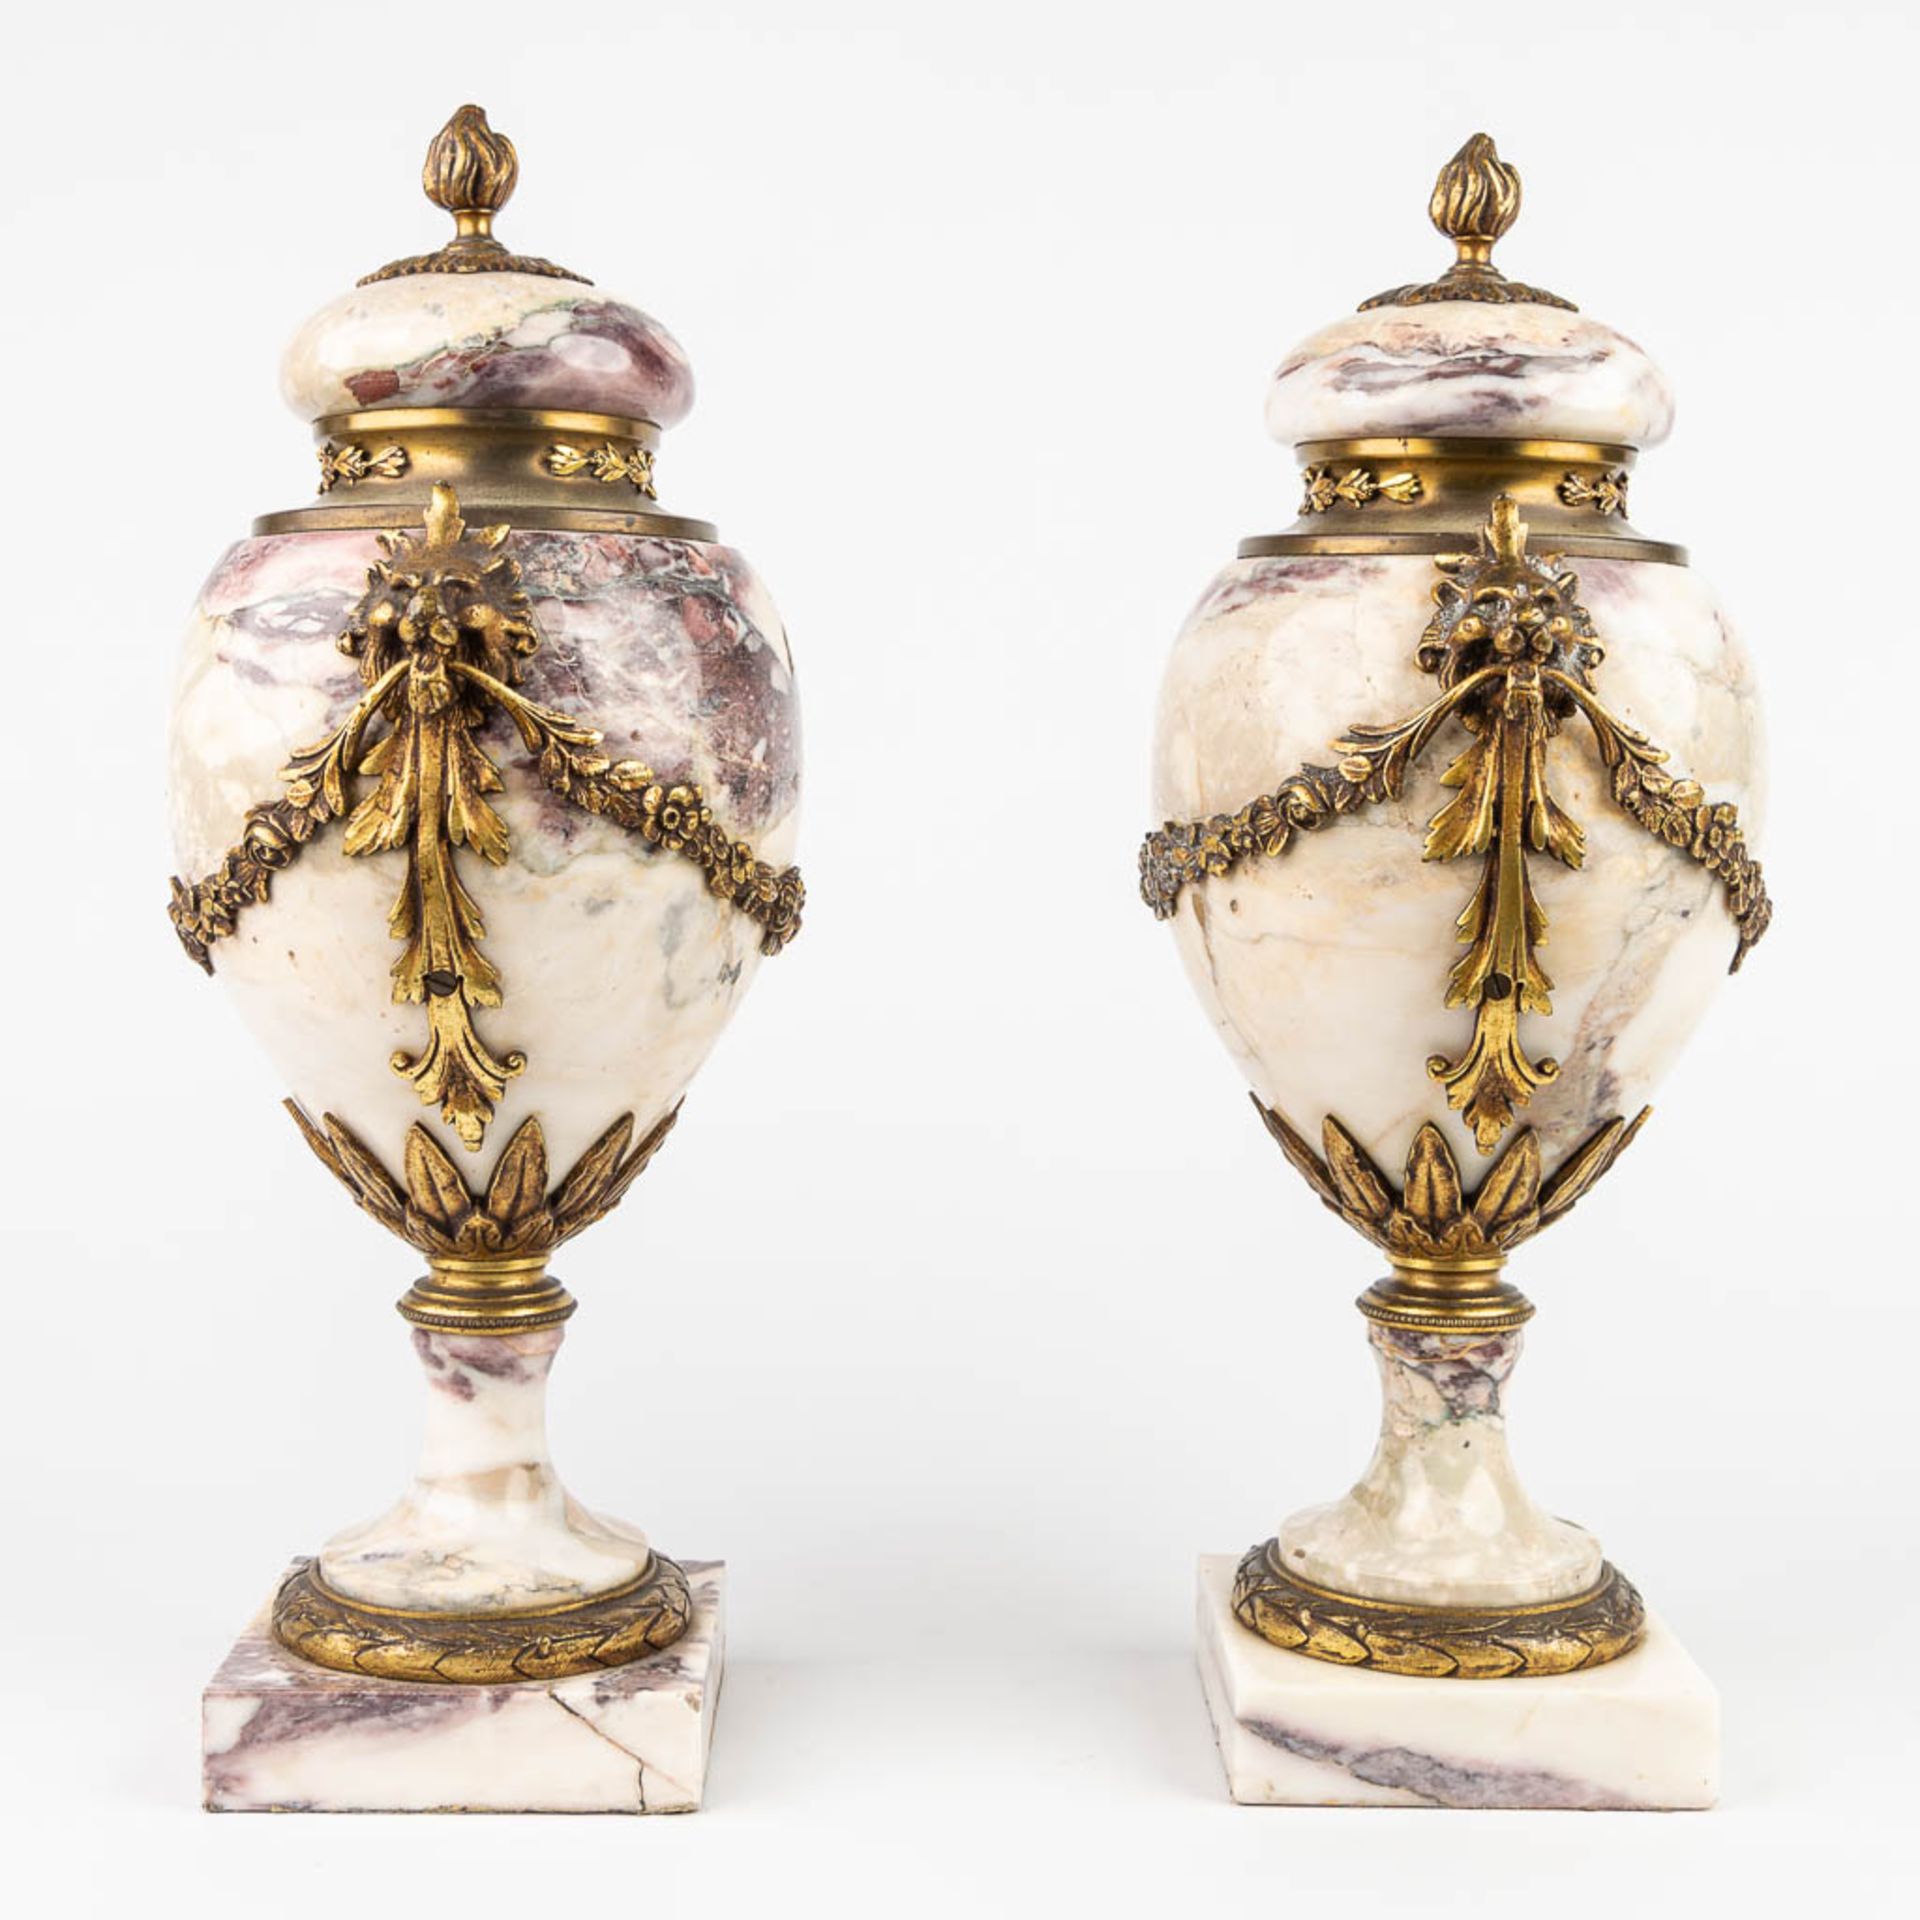 A pair of cassolettes made of marble and mounted with bronze. (H:40cm) - Image 3 of 15